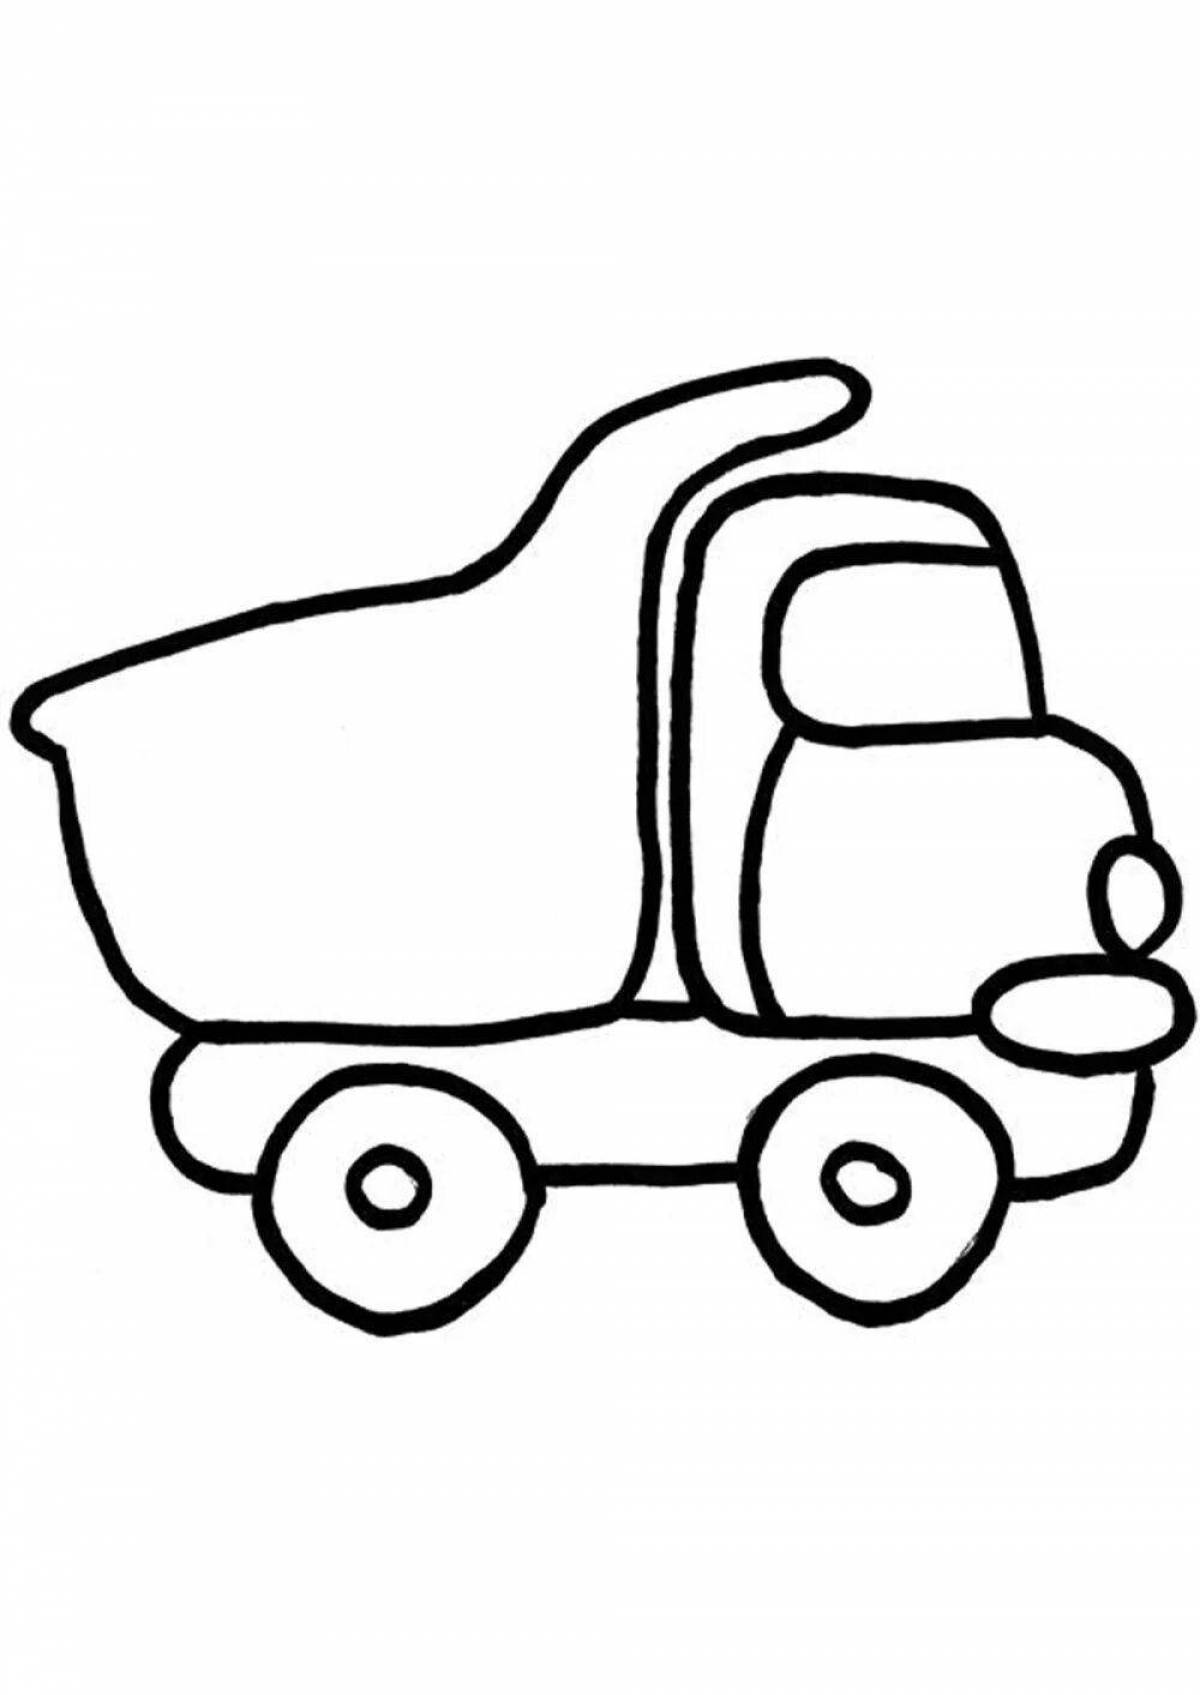 Amazing car coloring book for little ones